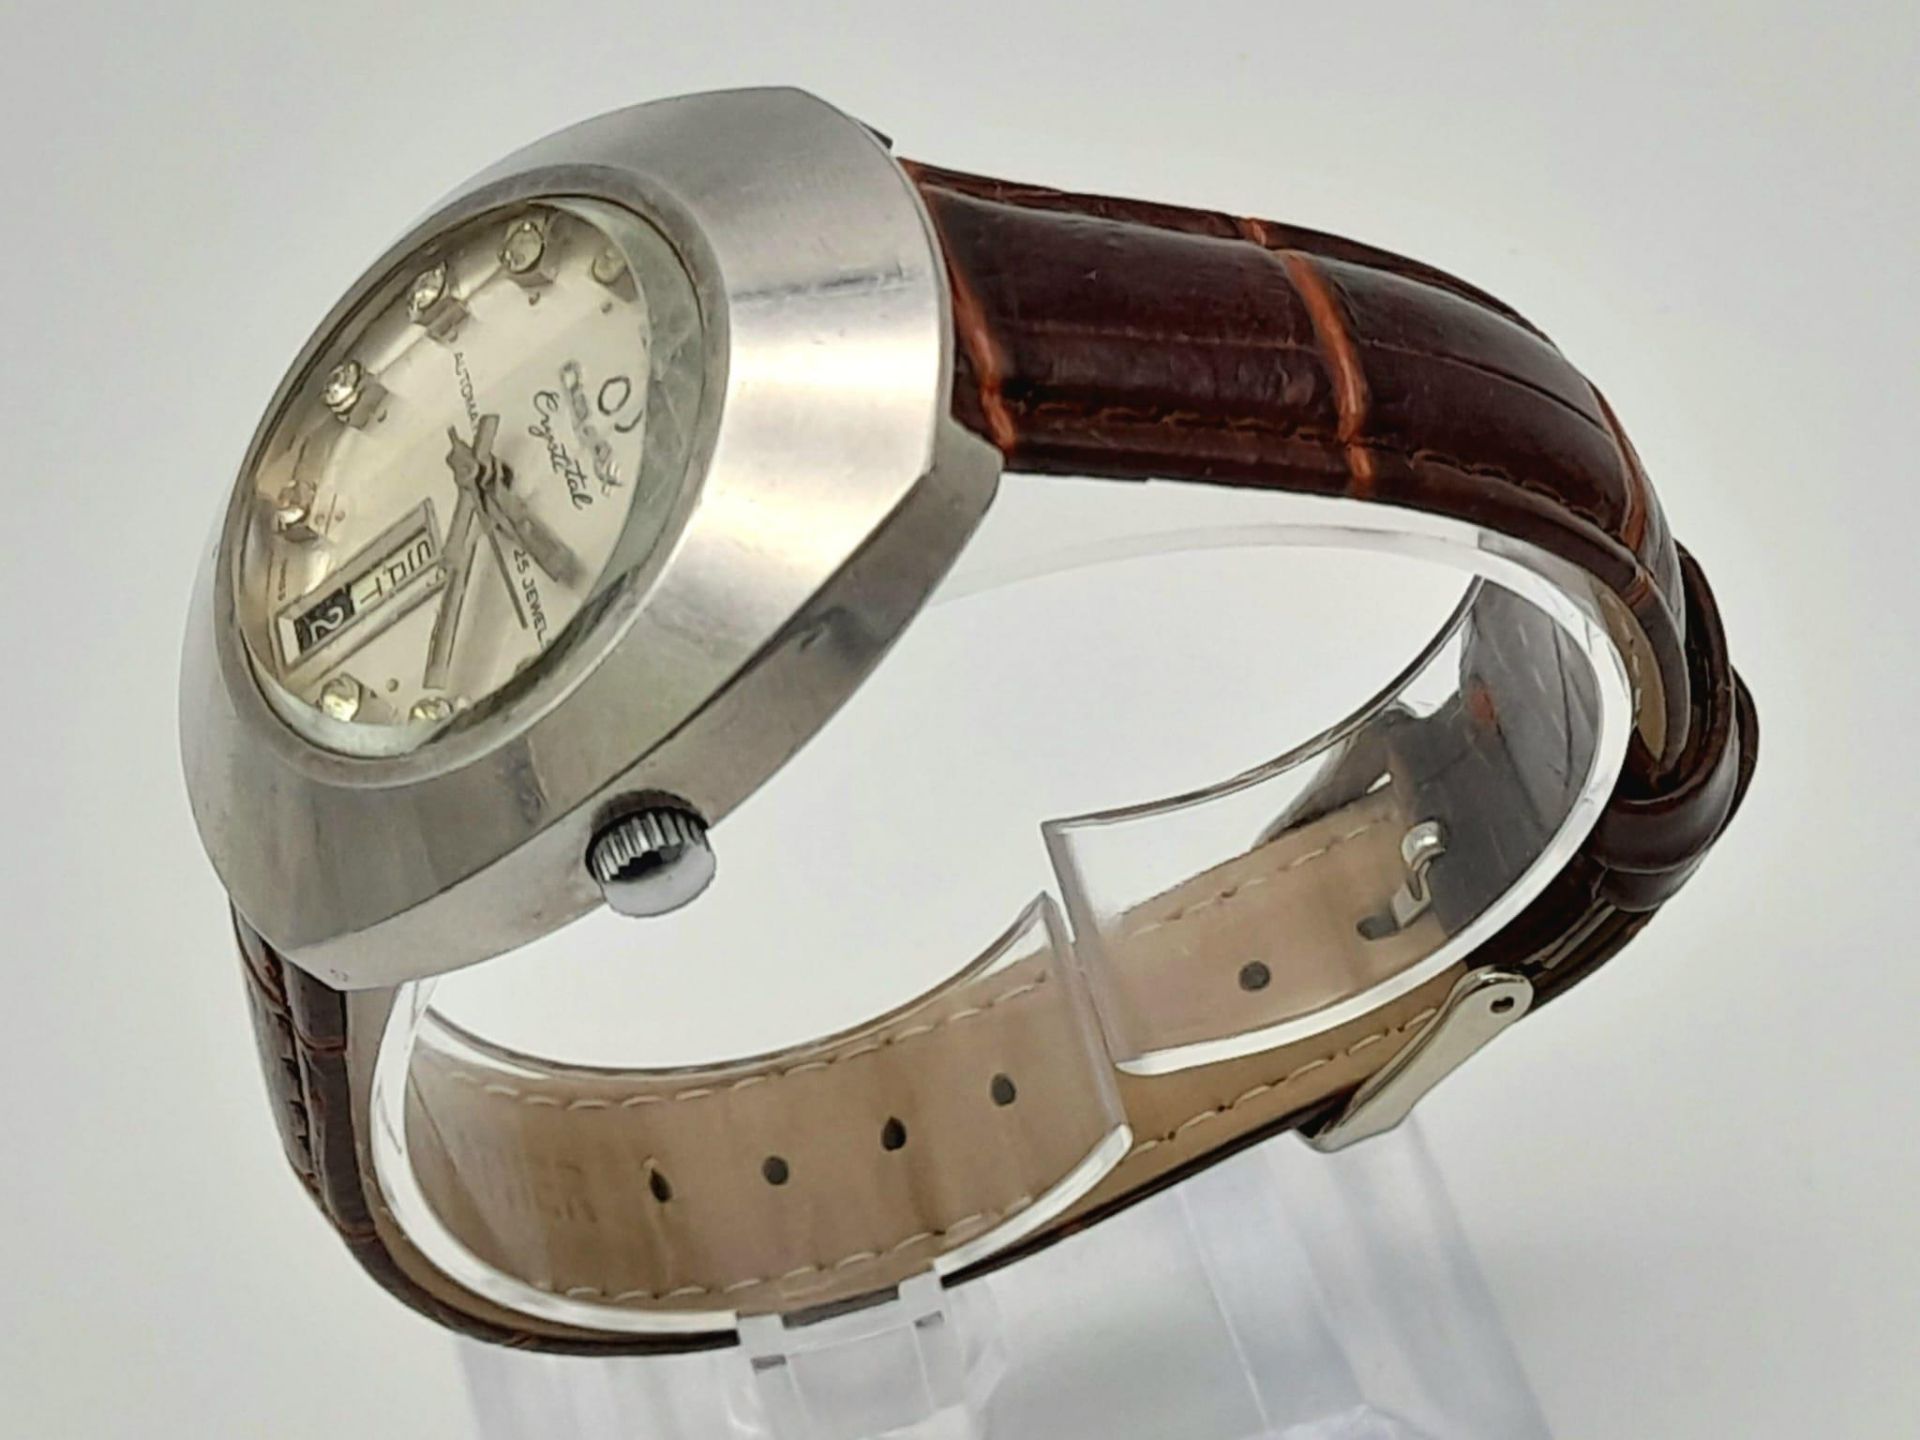 A Vintage Omax Crystal 25 Jewel Gents Watch. Brown leather strap. Stainless steel case - 36mm. - Bild 2 aus 4